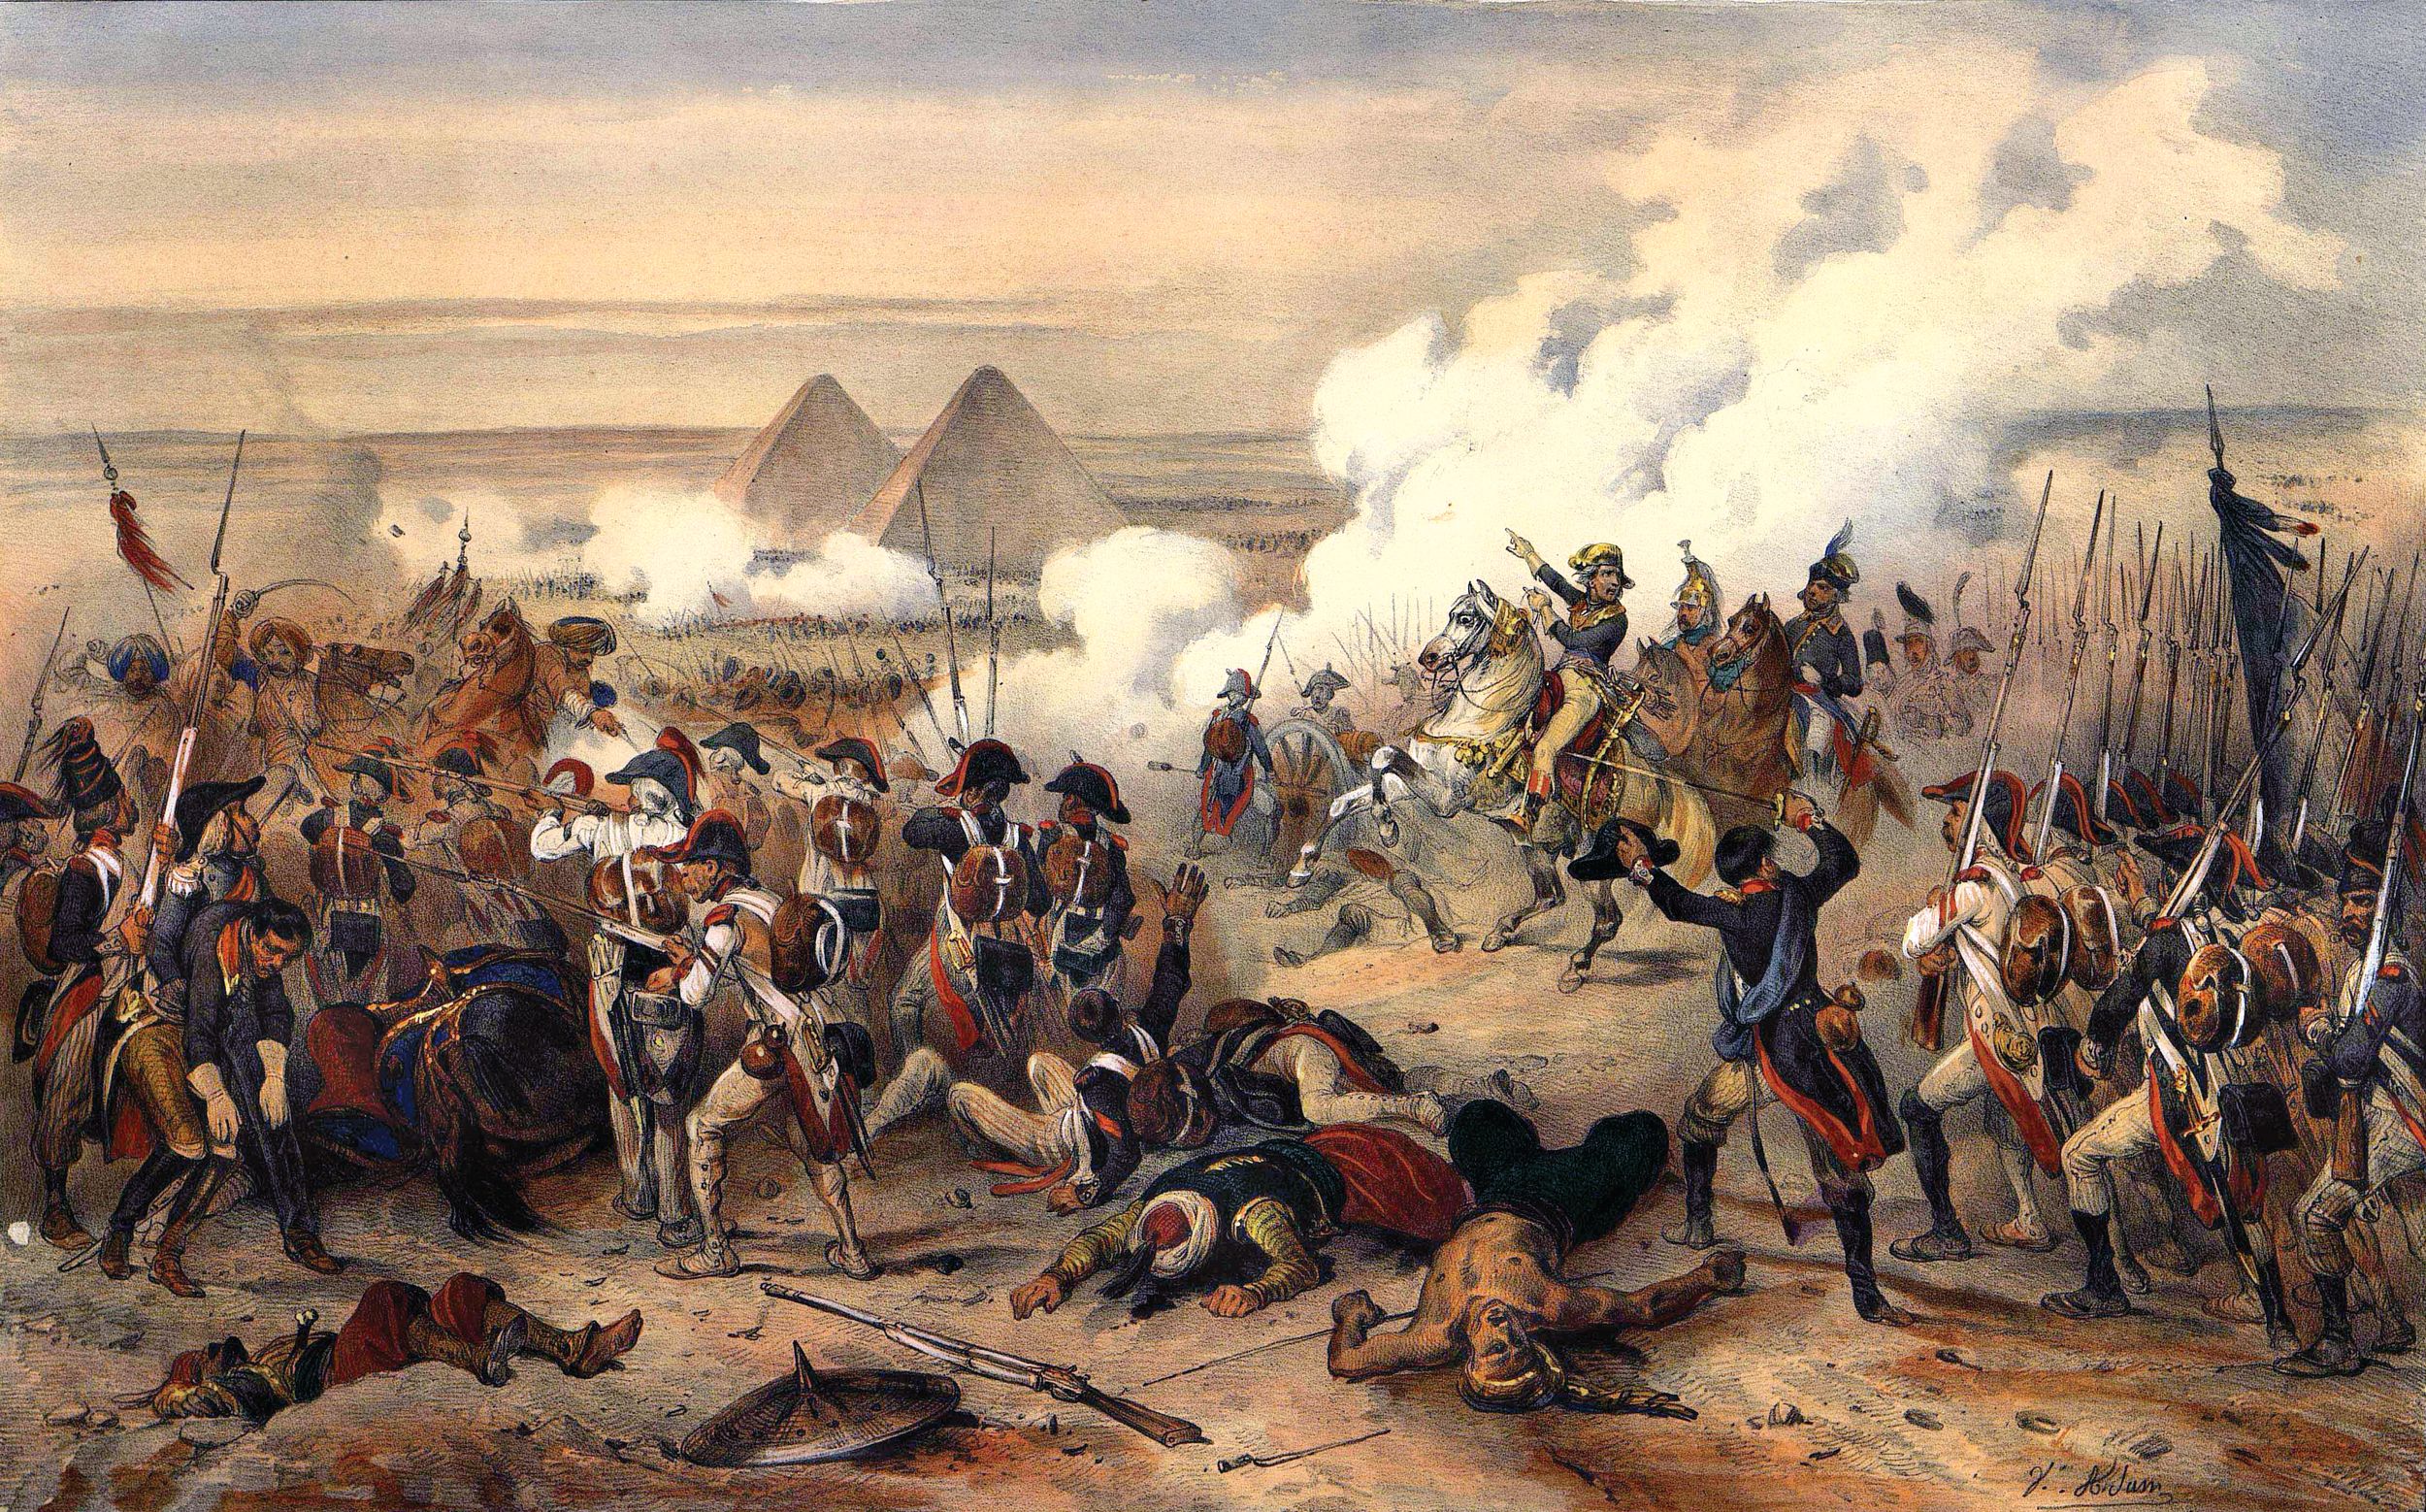 Napoleon crushed Ottoman forces at the Battle of the Pyramids, July 21, 1798, a week before Lord Nelson destroyed the French fleet in Aboukir Bay.